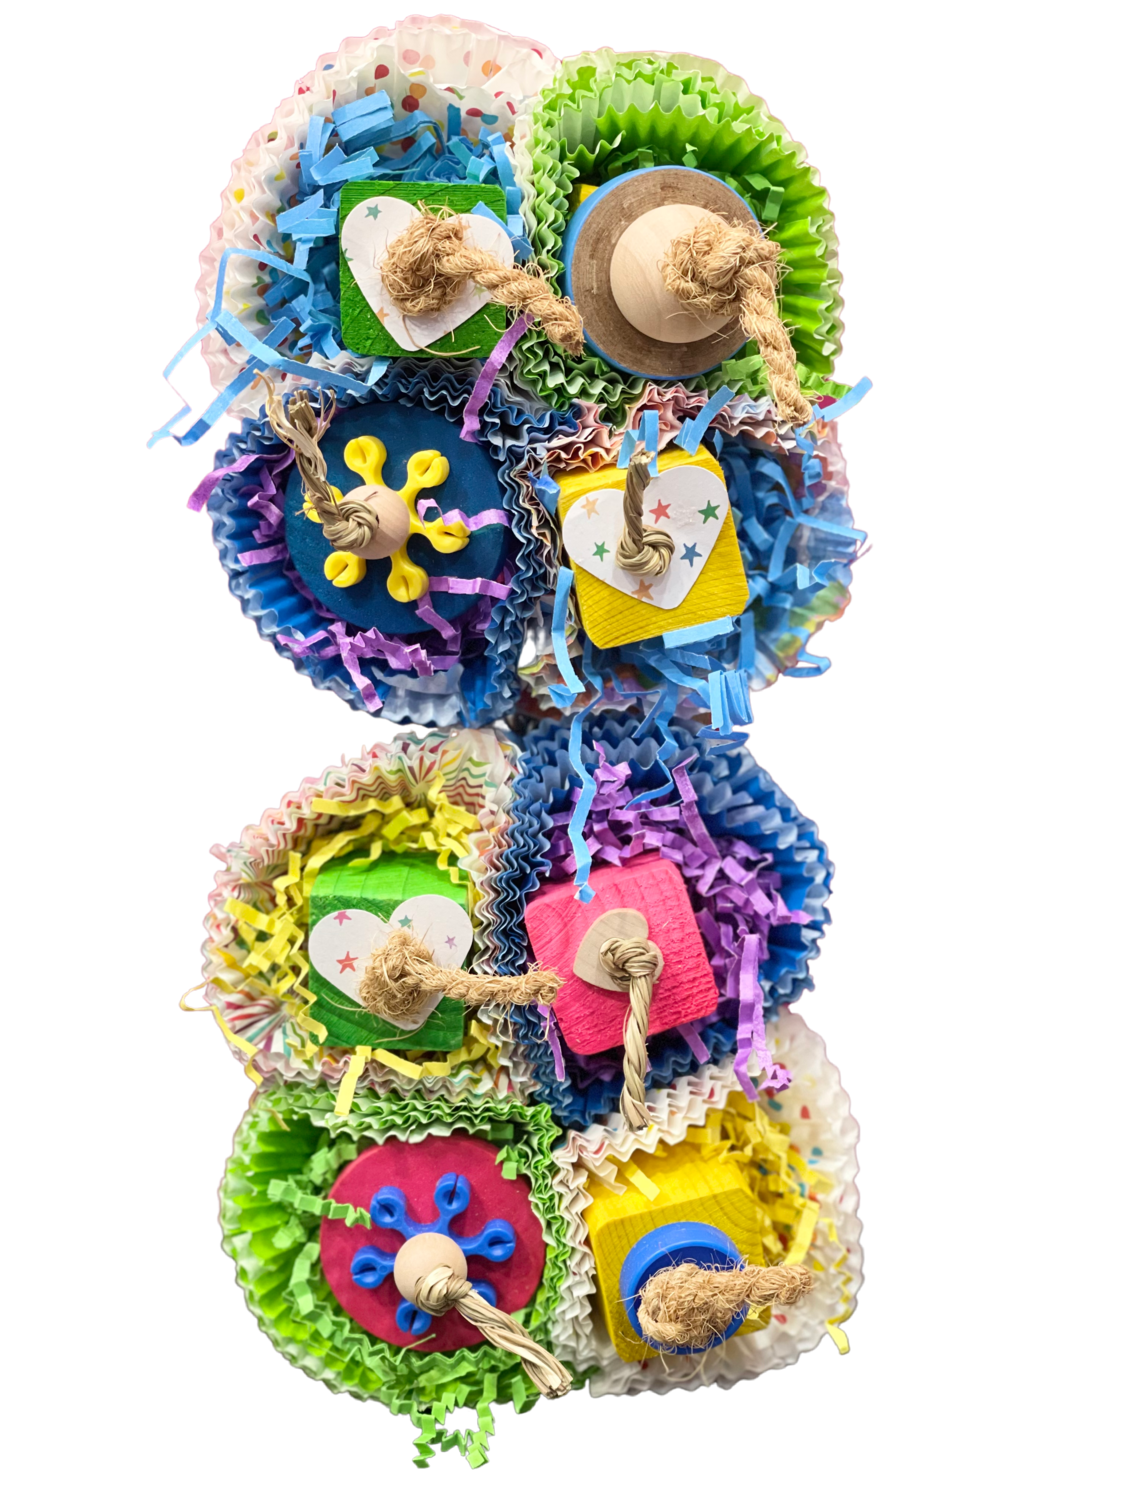 Lucy - 10.5" x 5.5" cage mount toy with pine cubes, cupcake wrappers, with wooden discs, wood hearts, plastic gears, wooden beads and paper hearts on cotton and craft ropes.